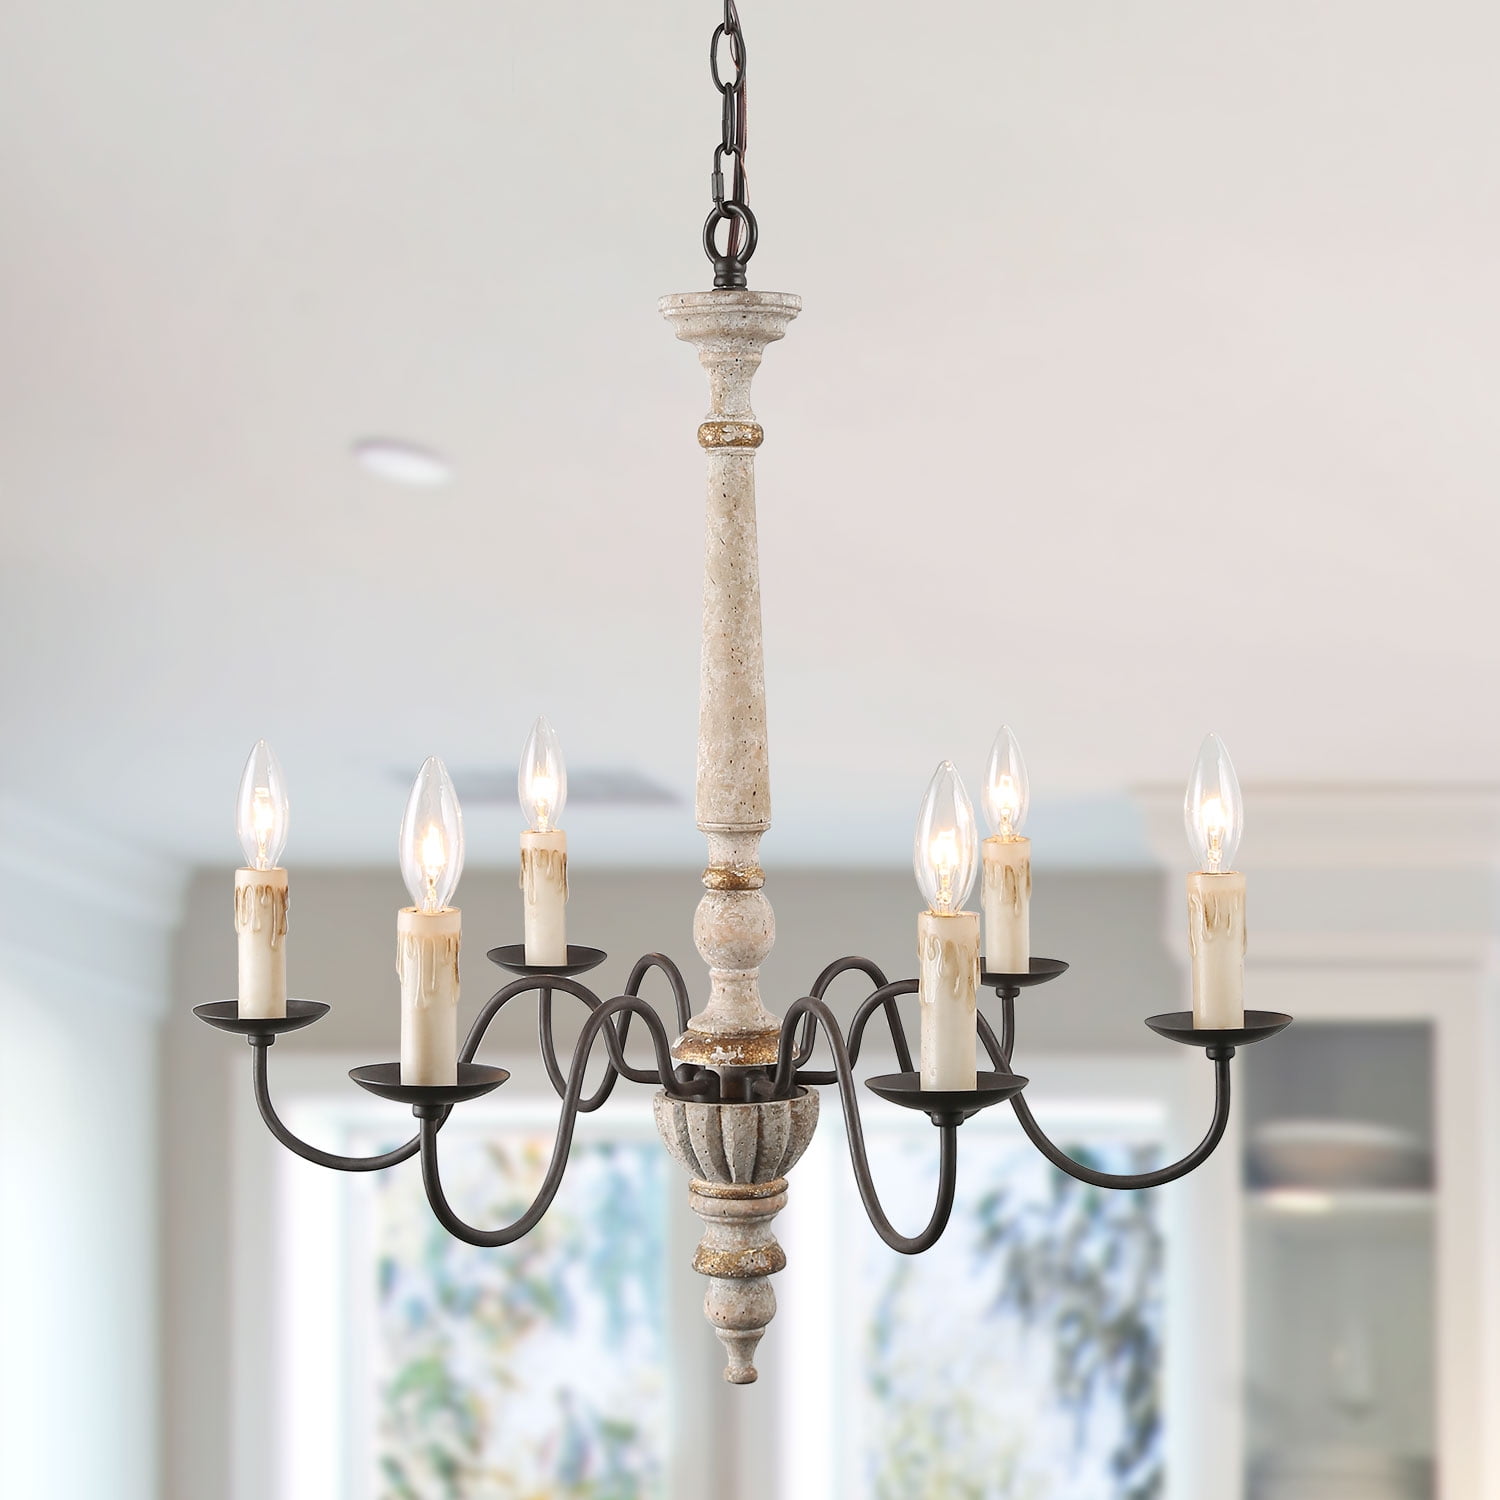 Buy LNC 6 Lights Retro-white Shabby-Chic French Country Chandeliers ...